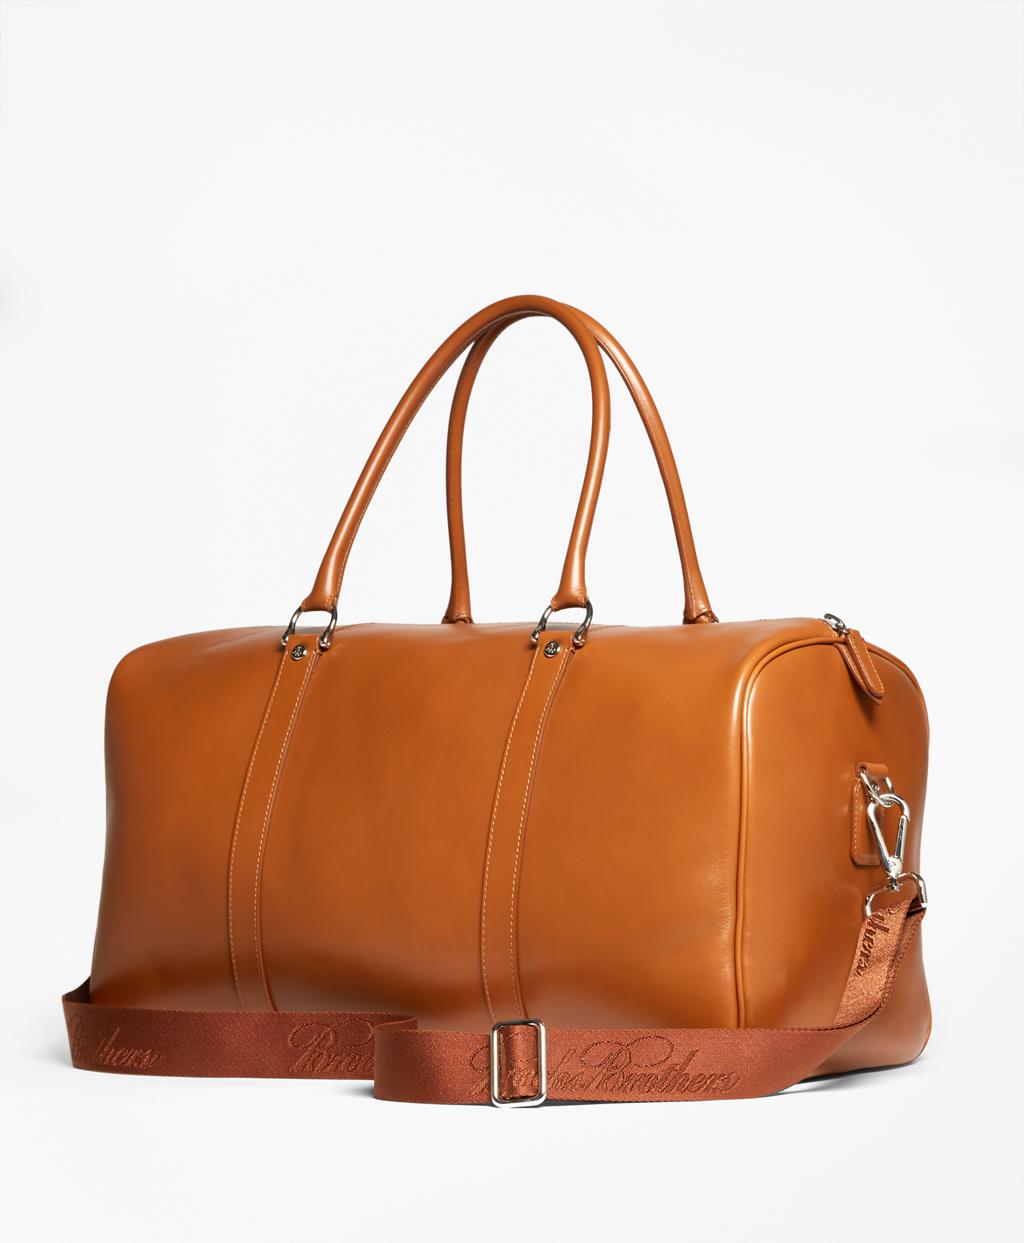 Brooks Brothers Leather Duffle Bag in Cognac (Brown) for Men - Lyst